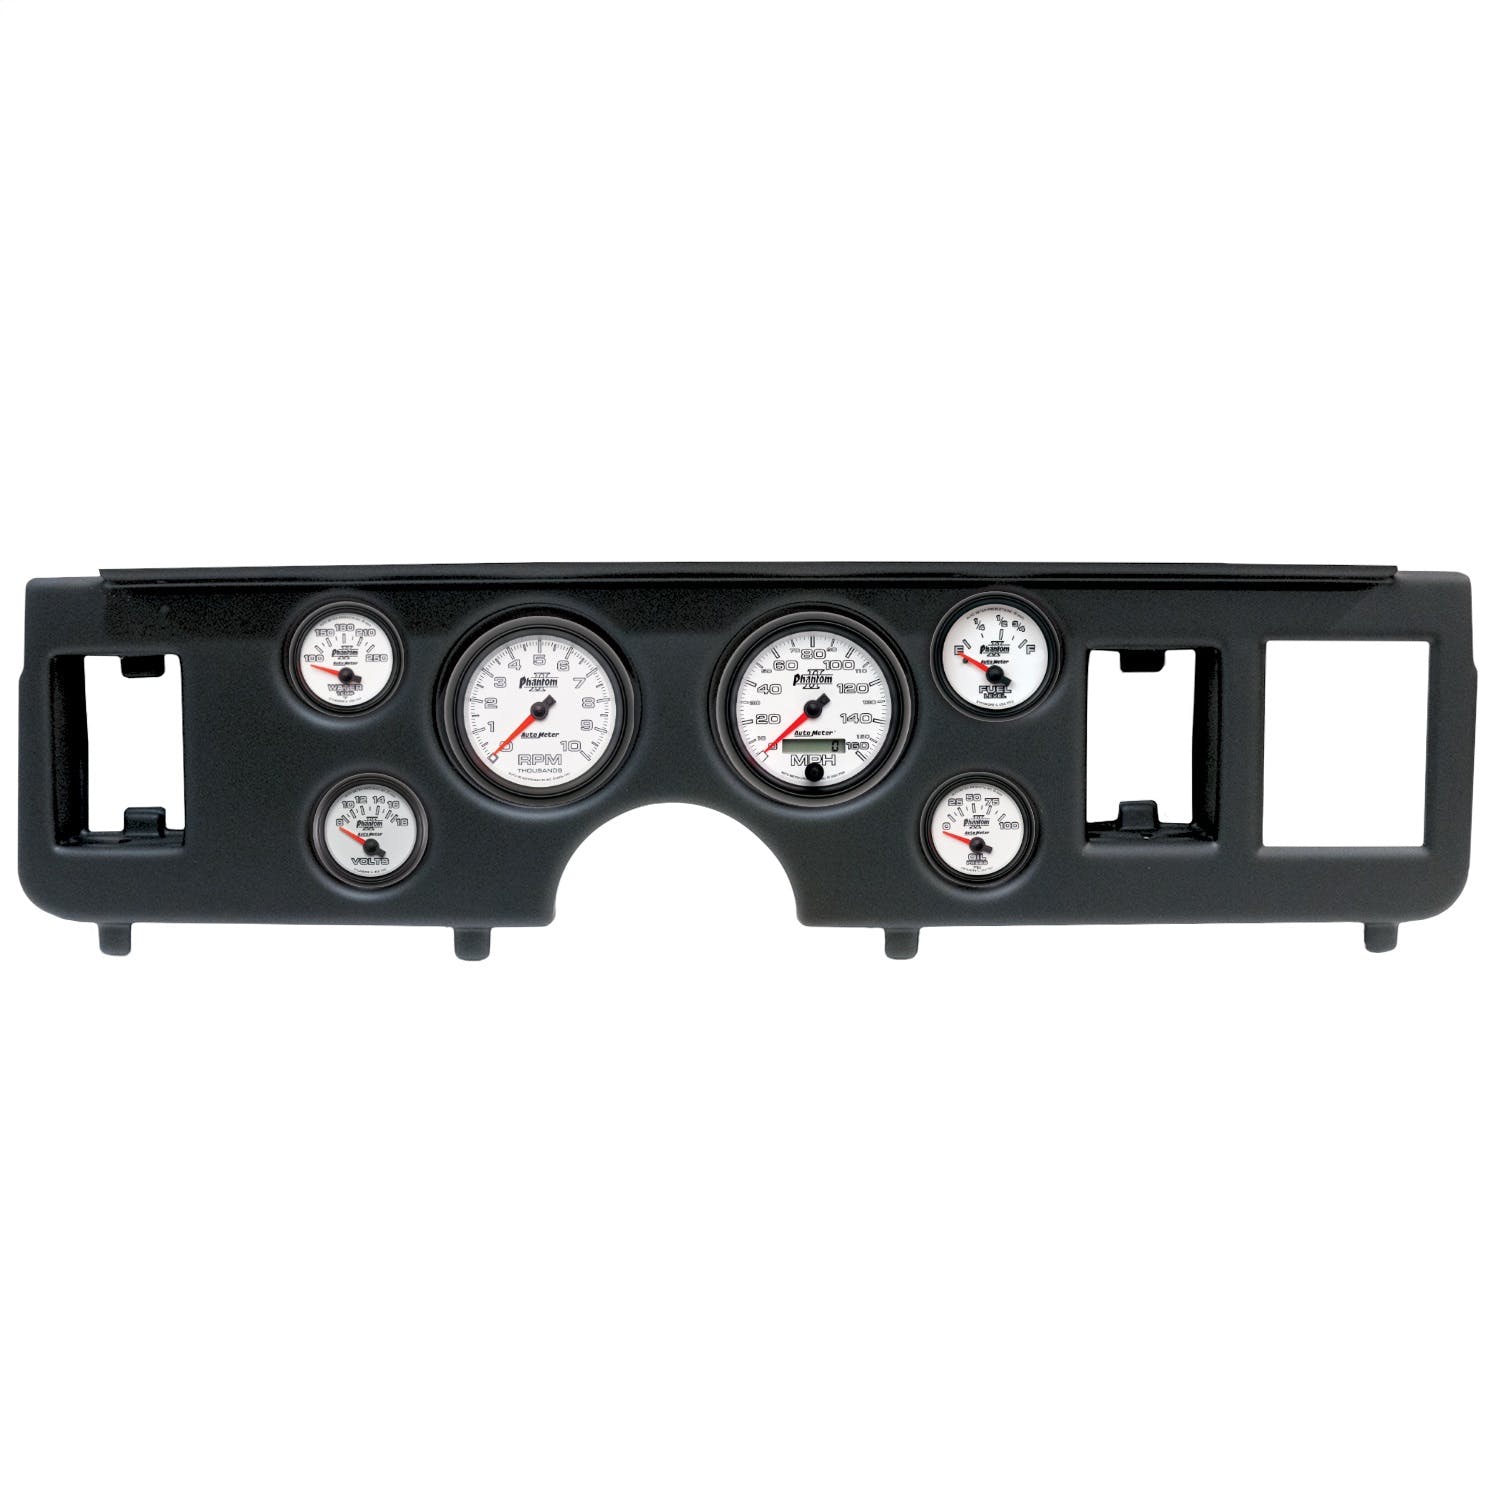 AutoMeter Products 2917-10 6 Gauge Direct-Fit Dash Kit, Ford Mustang 79-86, Phantom II